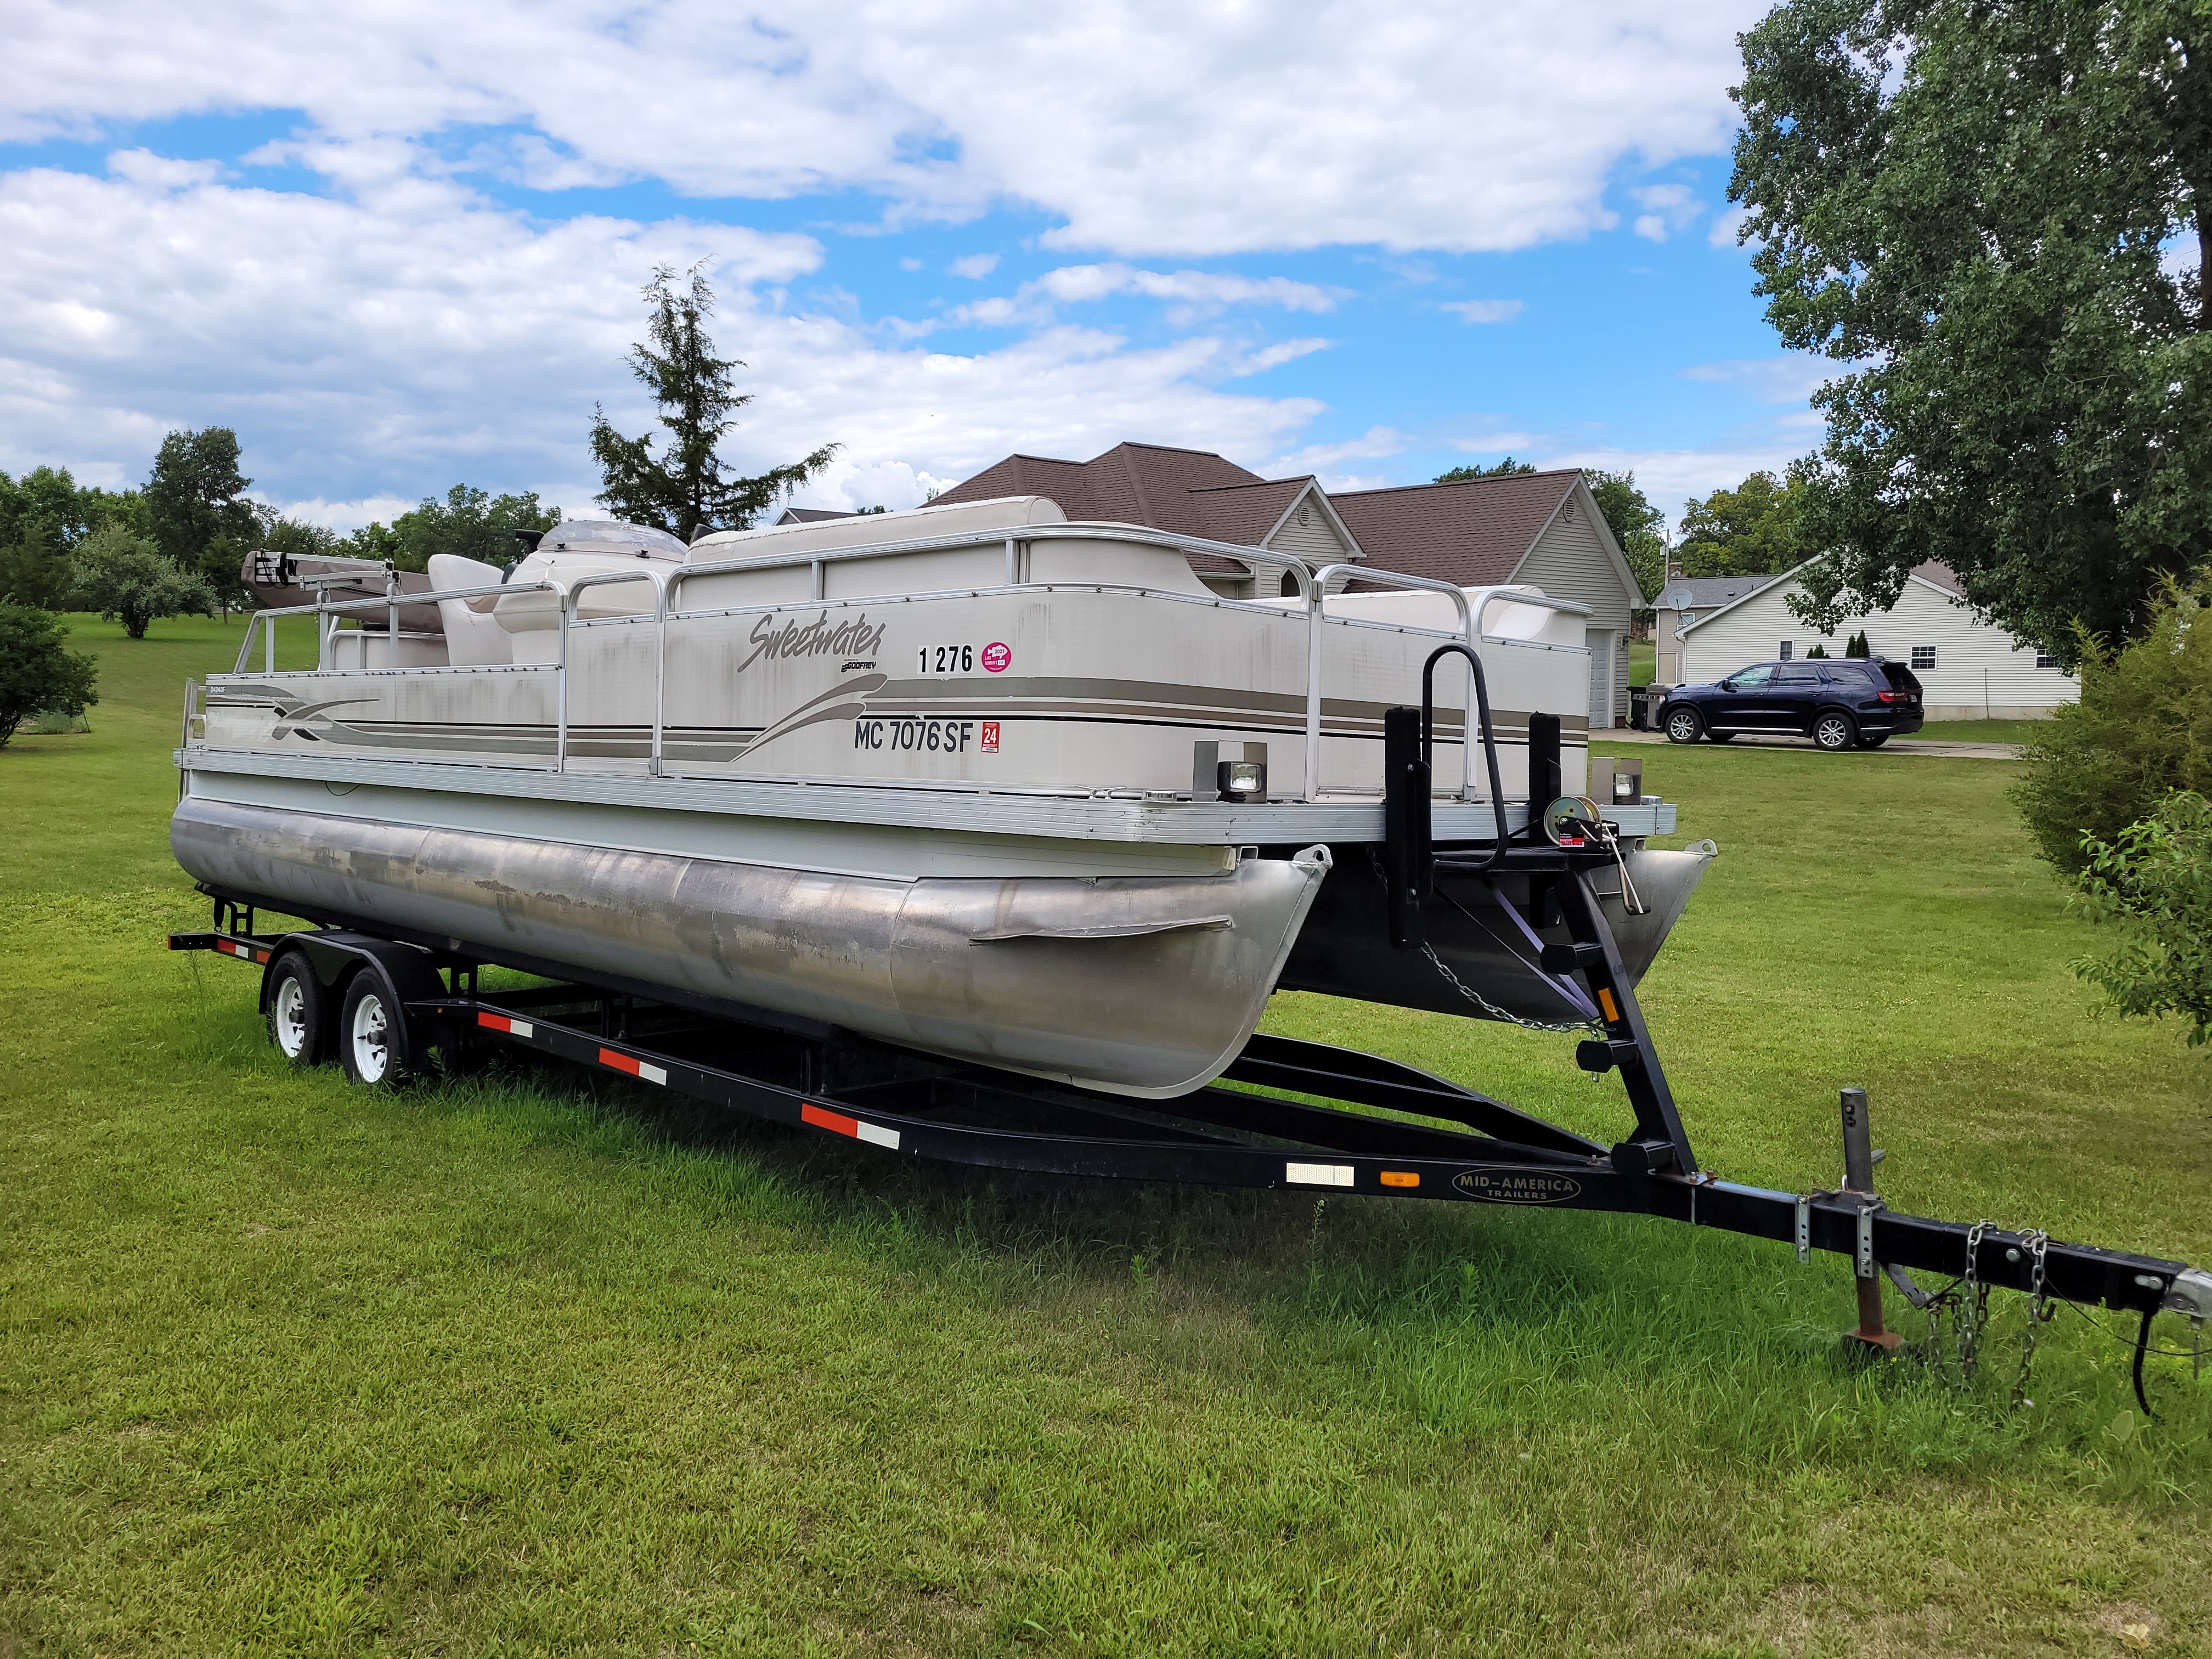 2001 24 foot Sweetwater Fishing pontoon Pontoon Boat for sale in Cement City, MI - image 2 